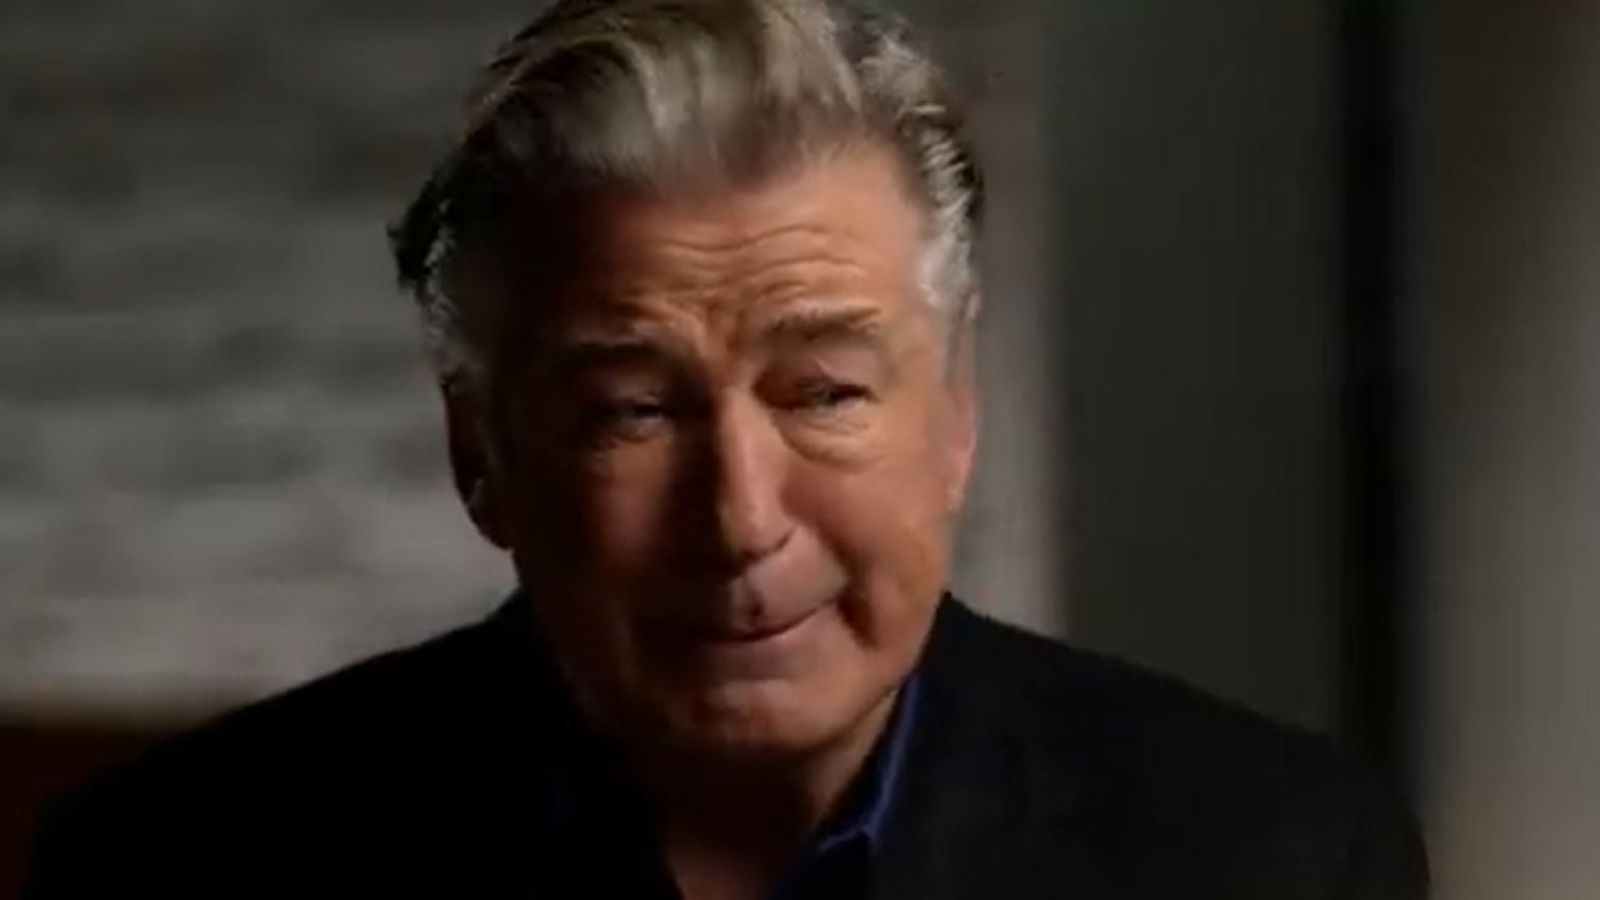 Alec Baldwin sobs in first interview since film set shooting – as mystery deepens after he says: ‘I did not pull trigger’